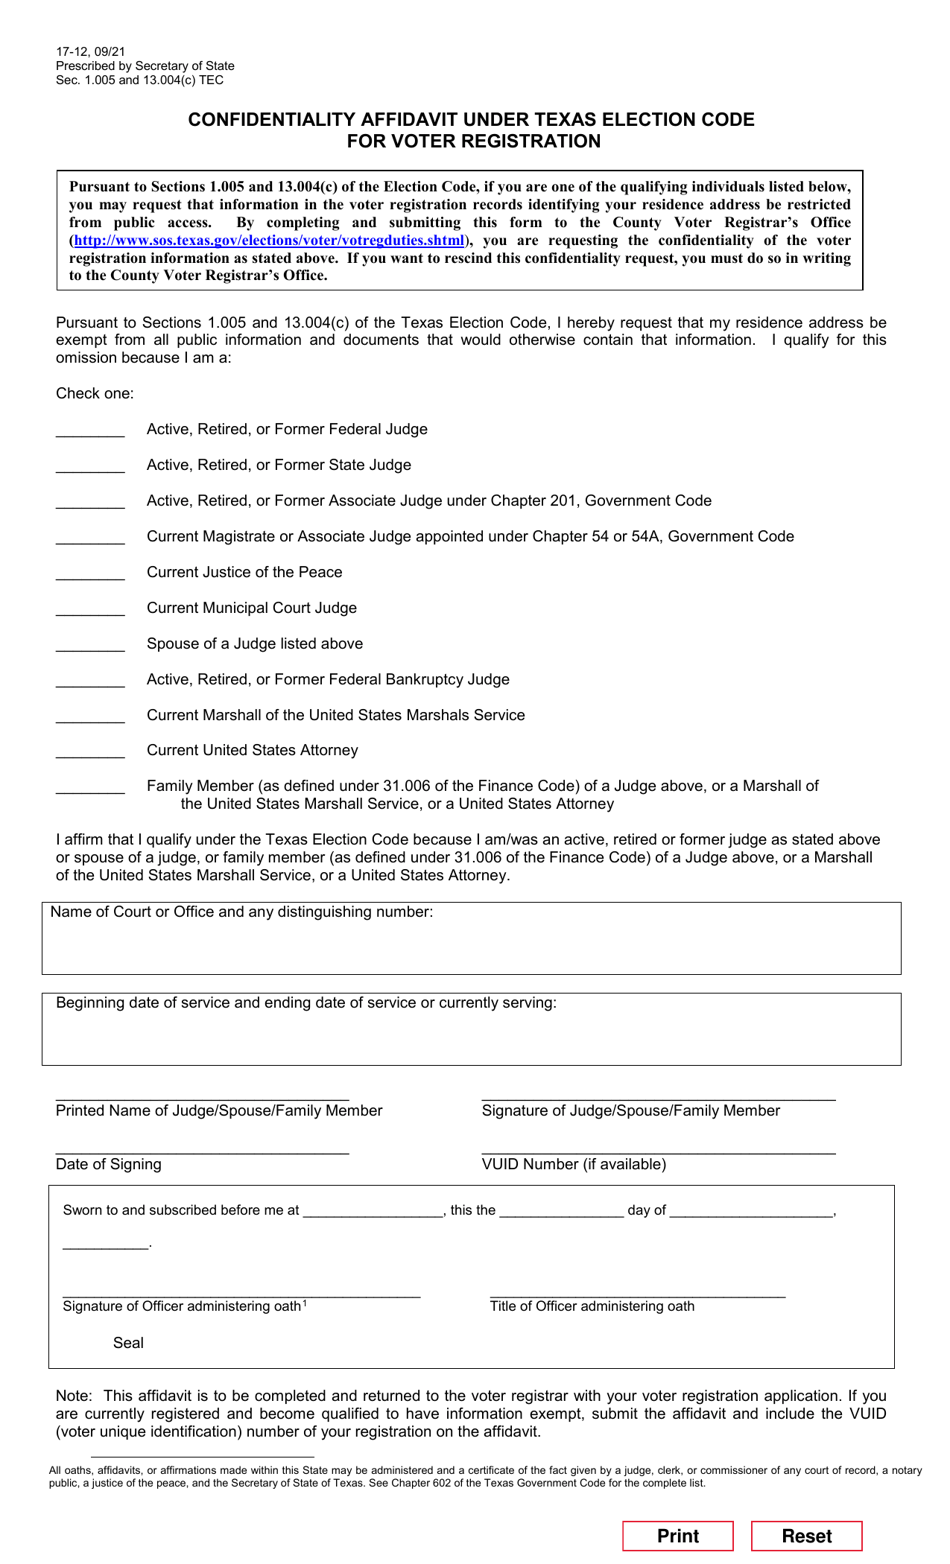 Form 17-12 Confidentiality Affidavit Under Texas Election Code for Voter Registration - Texas (English / Spanish), Page 1